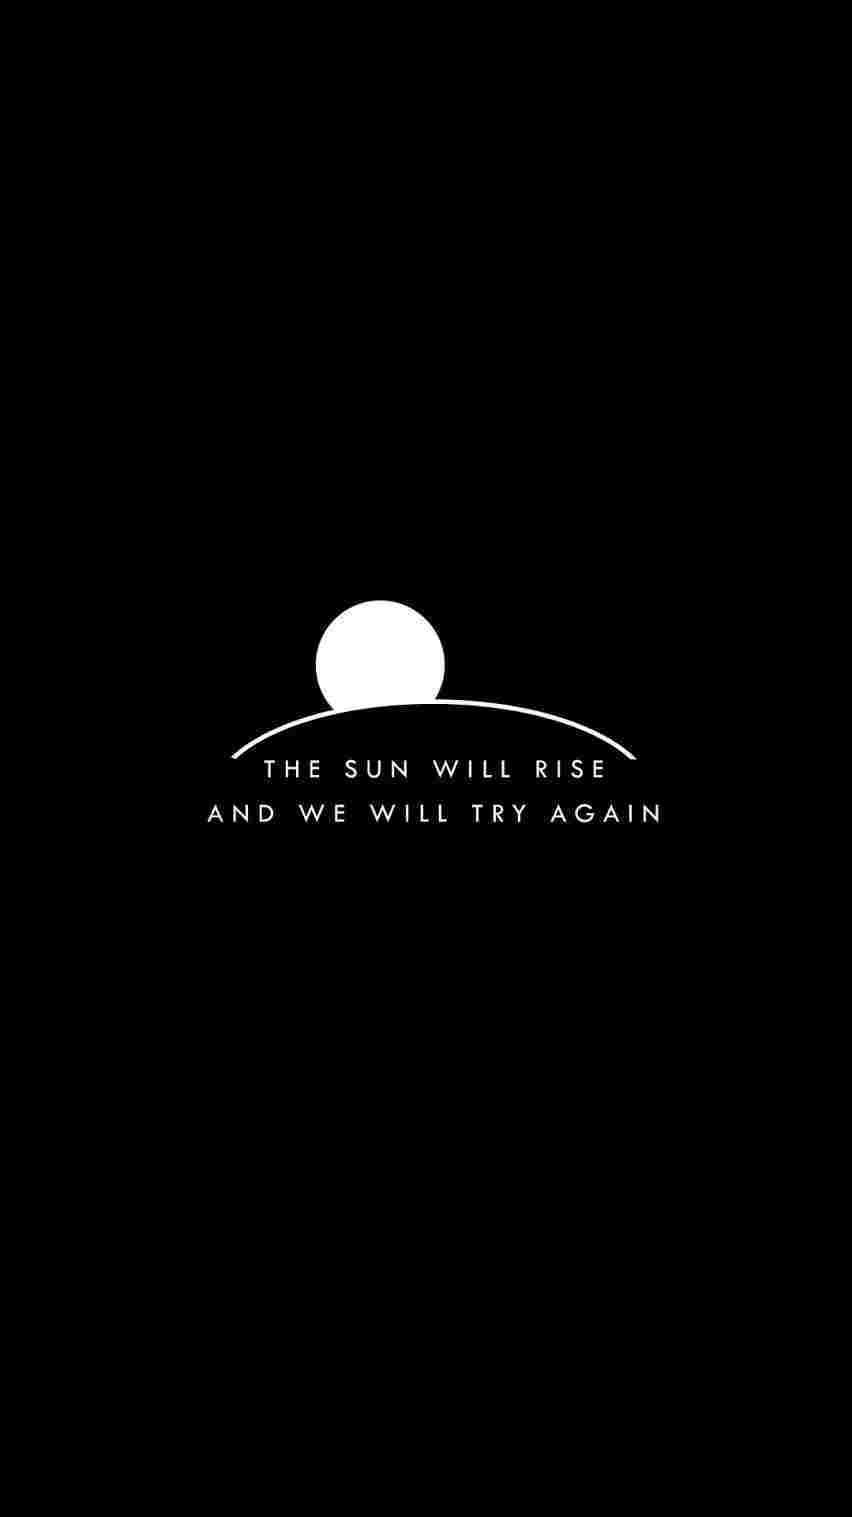 Aesthetic Black Wallpaper, The Sun Will Rise And We Will Try Again